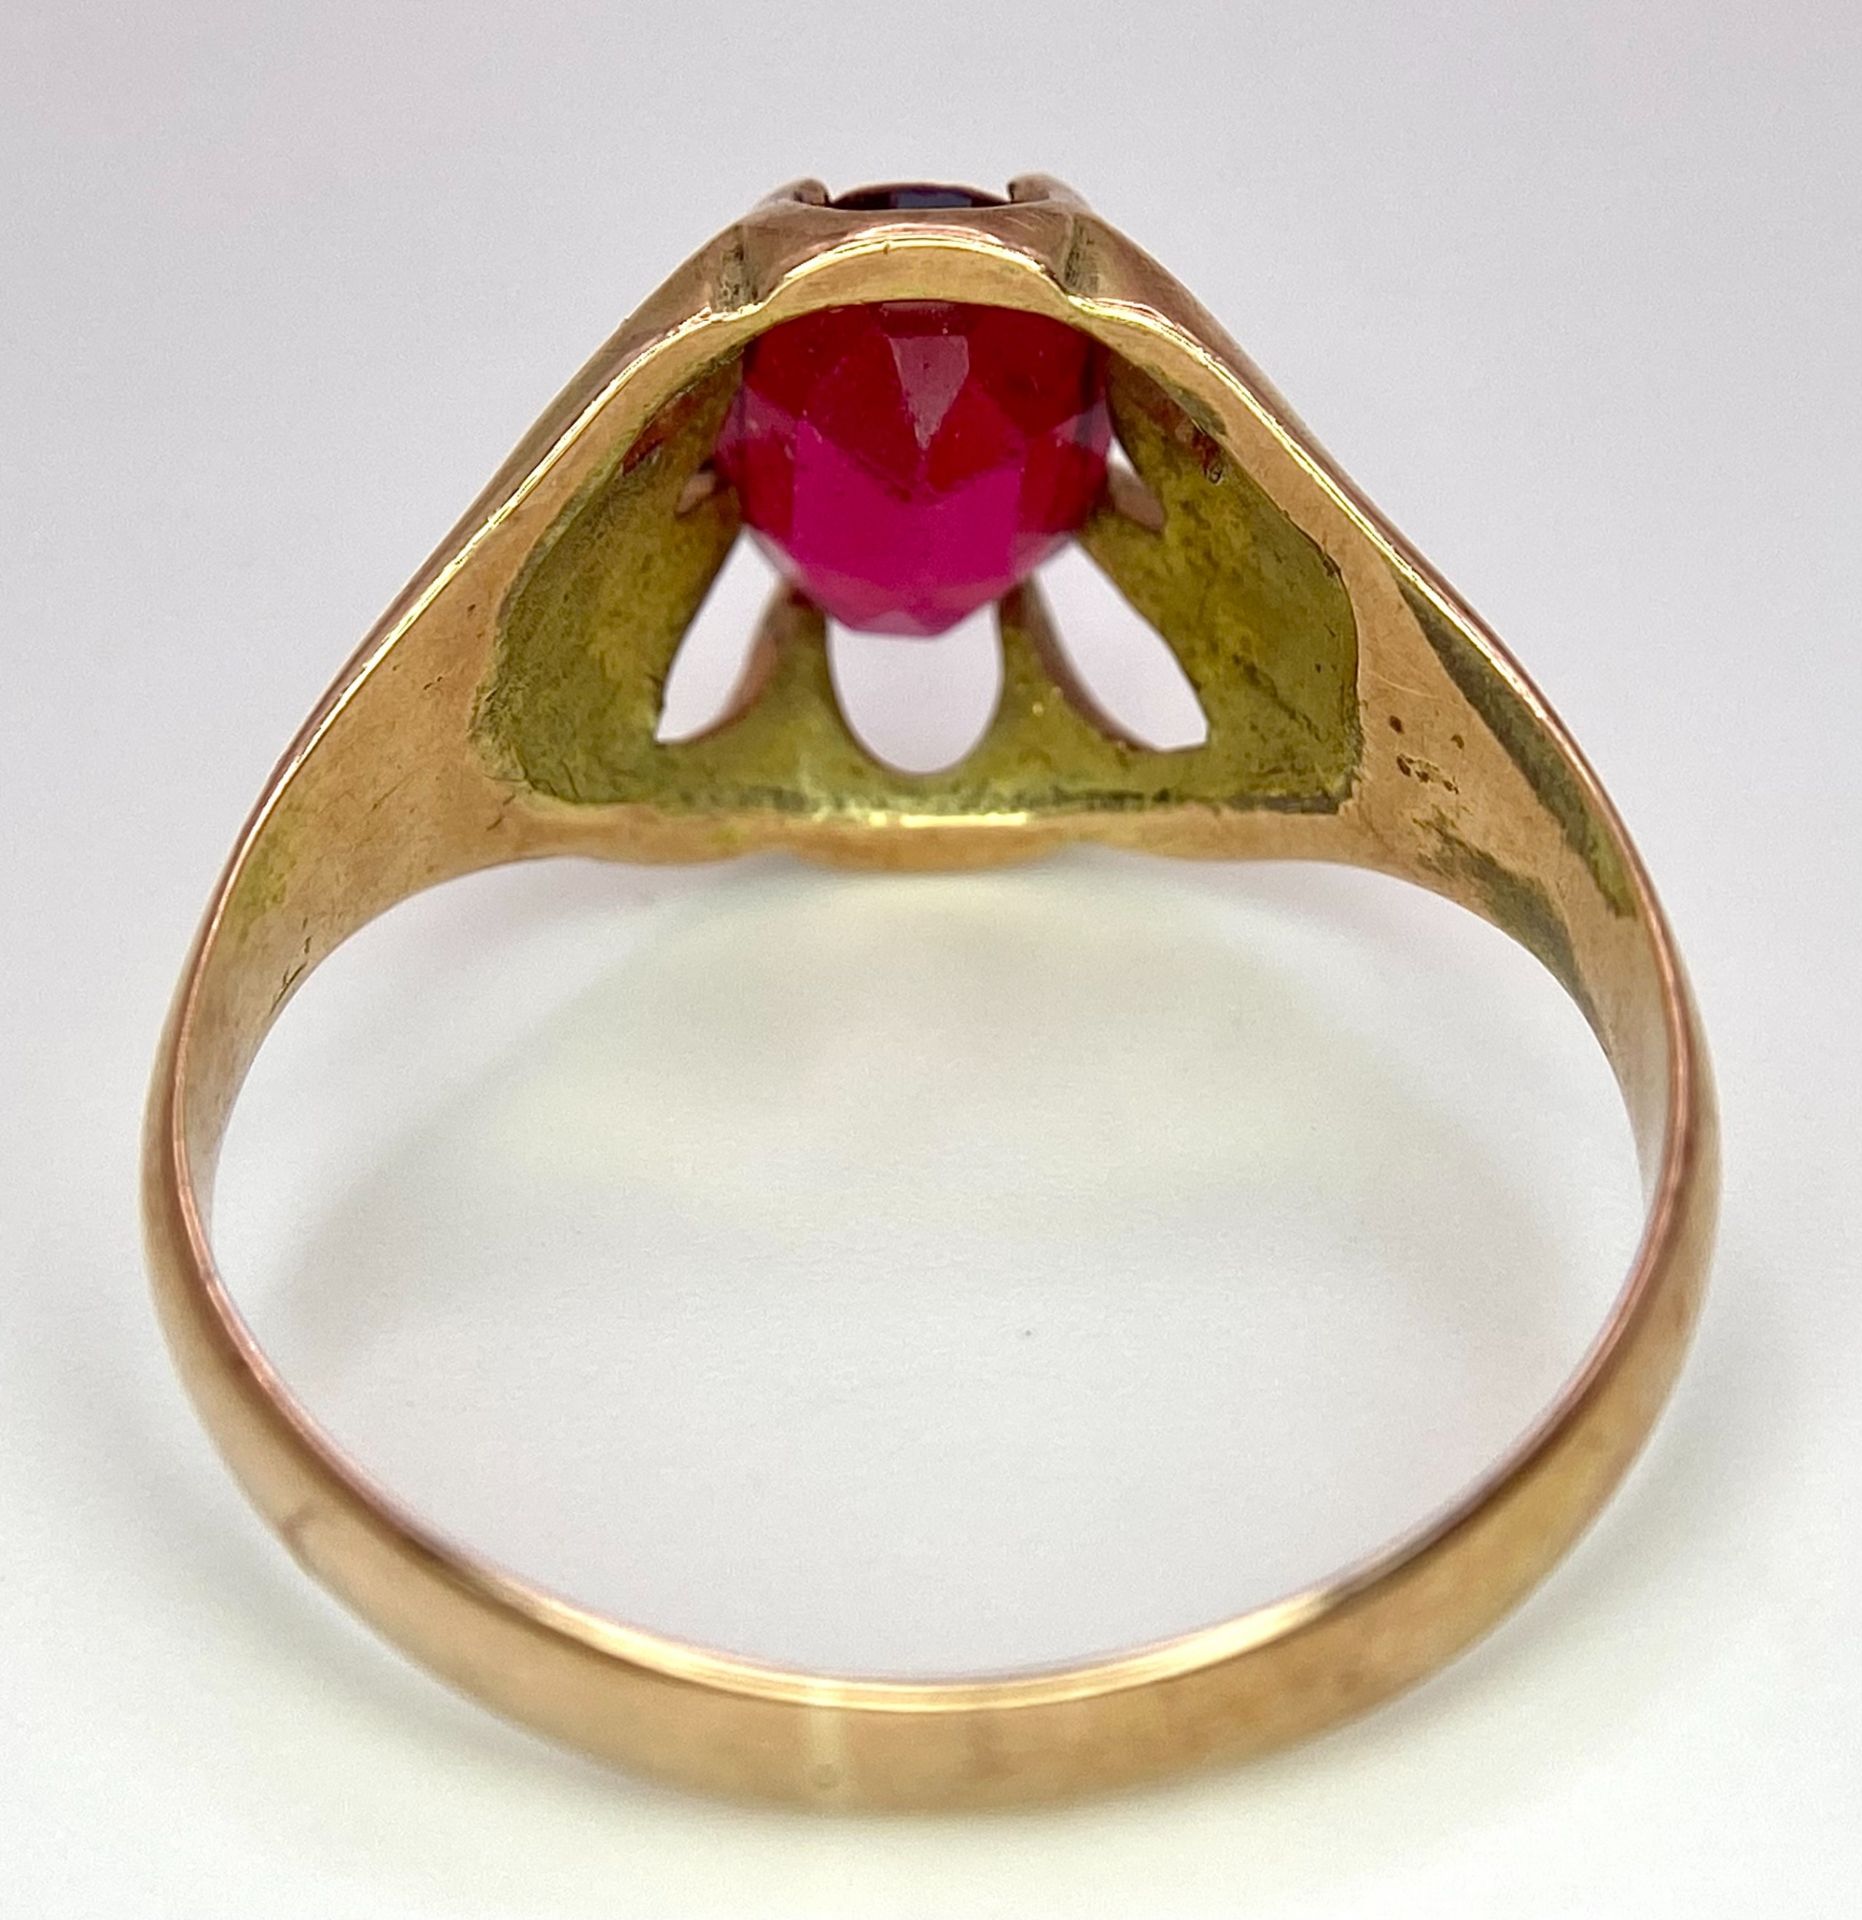 A vintage, 9 K rose gold solitaire ring with an oval cut ruby, ring size: U, weight: 3.8 g. - Bild 5 aus 7